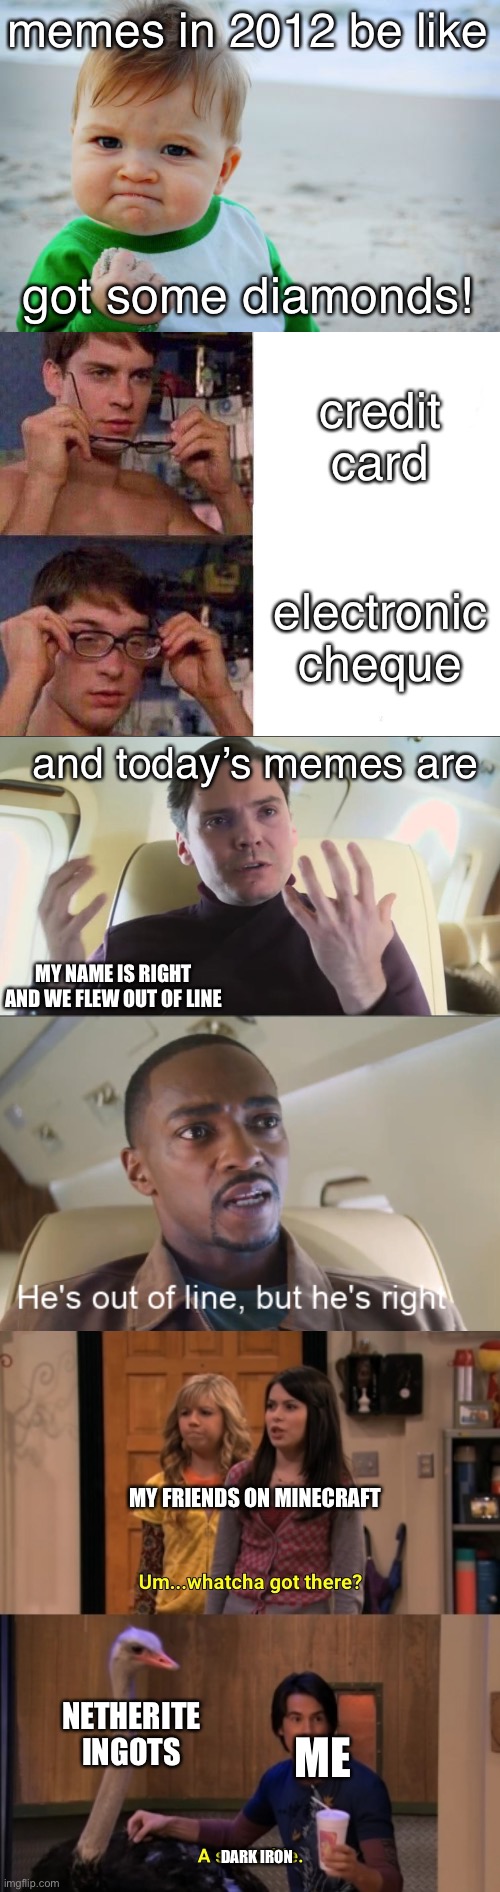 The history of memes | memes in 2012 be like; got some diamonds! credit card; electronic cheque; and today’s memes are; MY NAME IS RIGHT AND WE FLEW OUT OF LINE; MY FRIENDS ON MINECRAFT; NETHERITE INGOTS; ME; DARK IRON | image tagged in memes,success kid original,spiderman glasses,he's out of line but he's right,whatcha got there | made w/ Imgflip meme maker